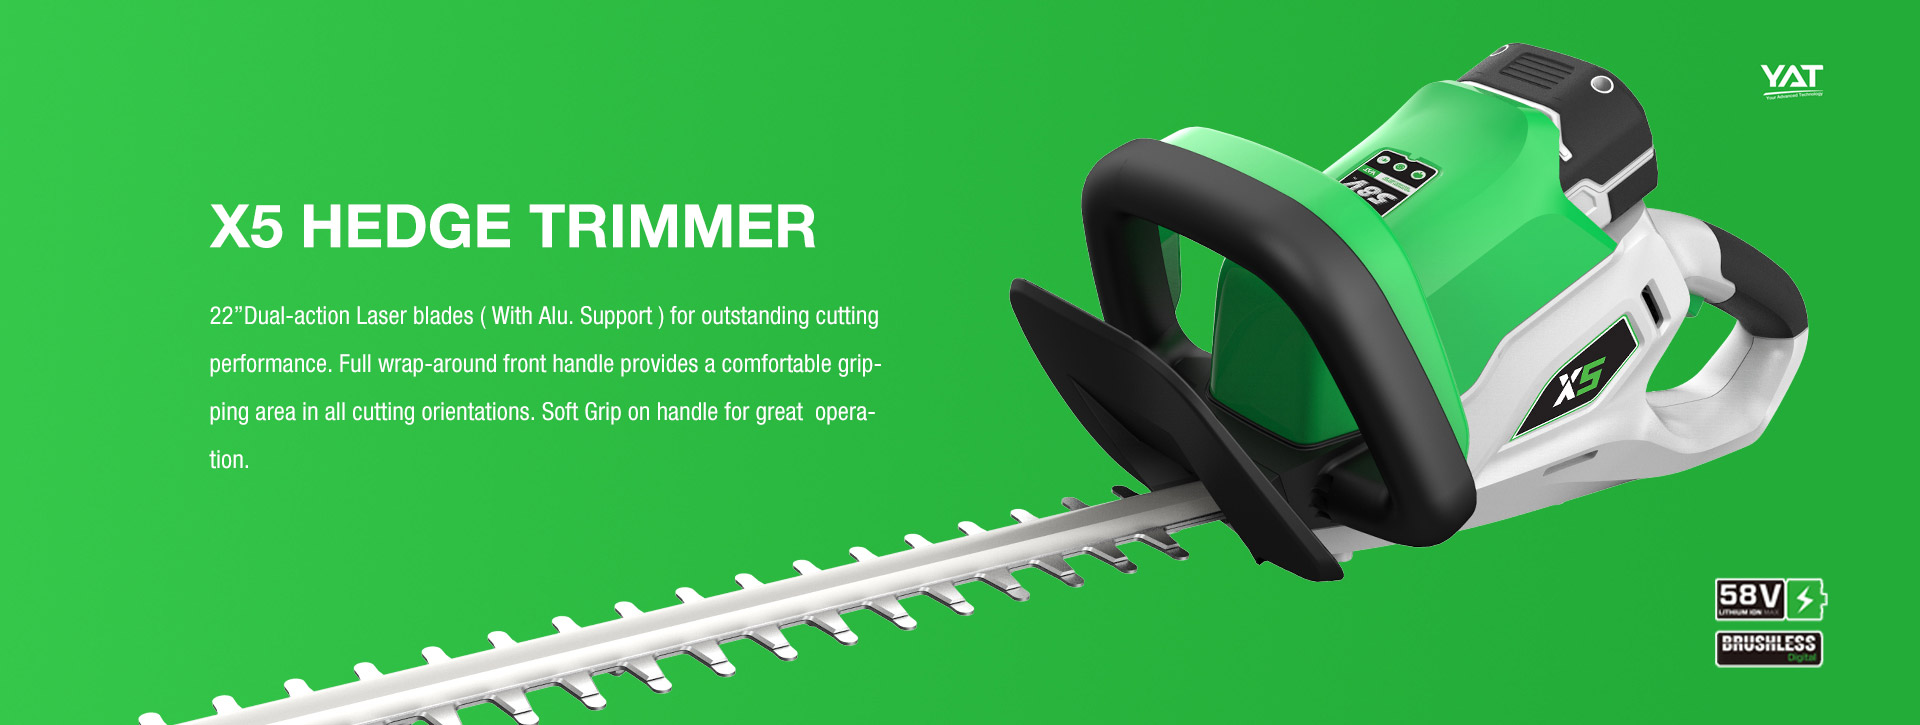 X5 HEDGE TRIMMER